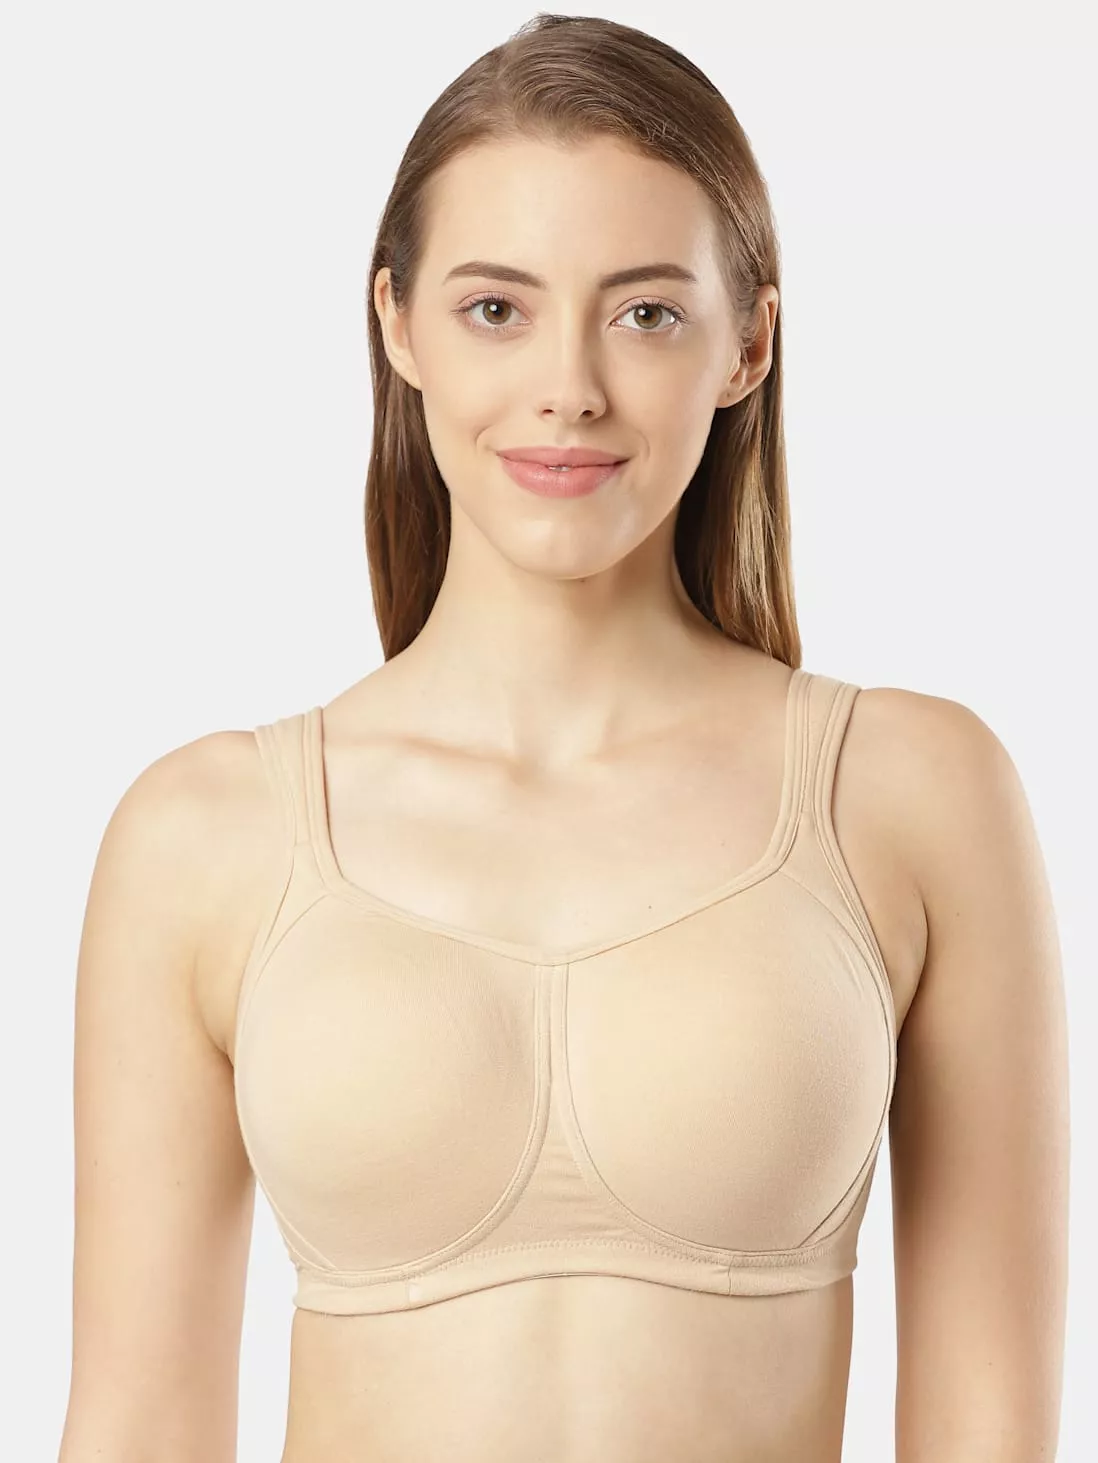 Zivame True Curv Padded Non Wired Full Coverage Super Support Bra -  Anthracite